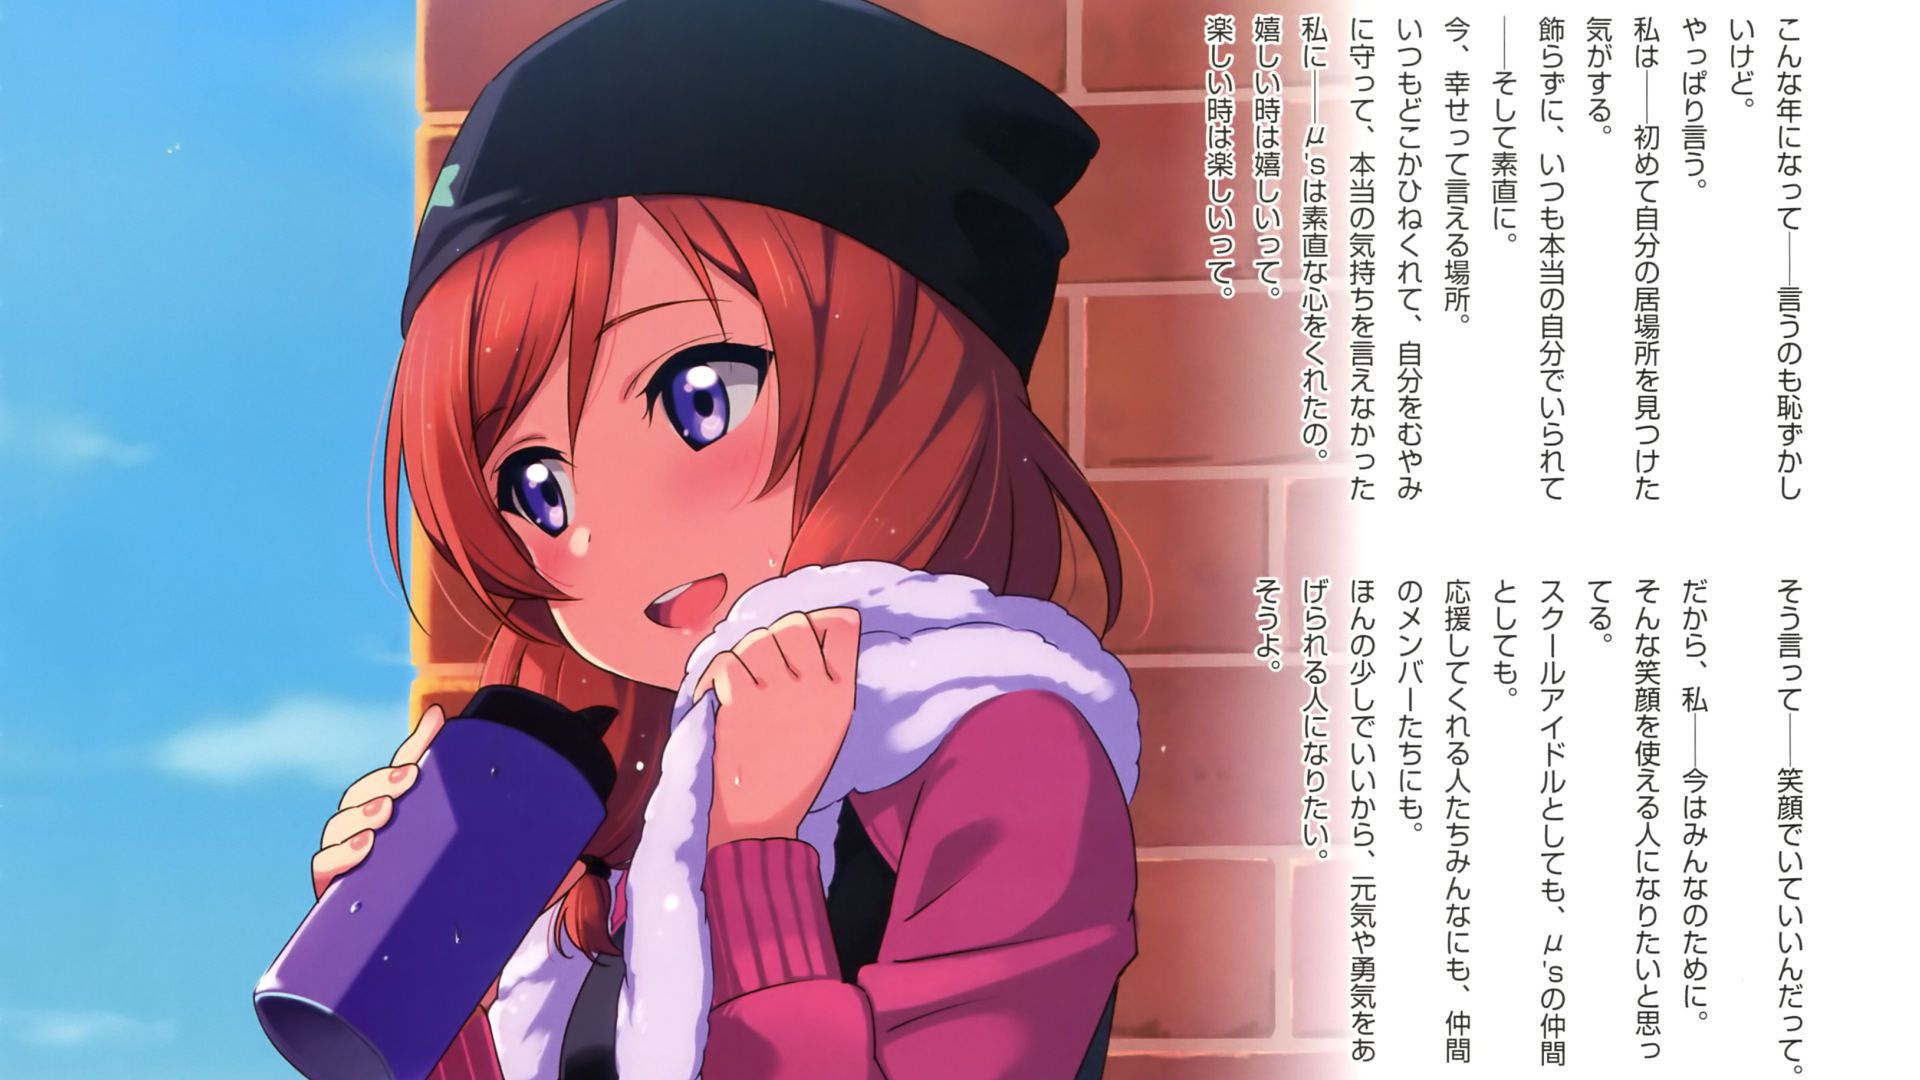 21229_lovelive_PC